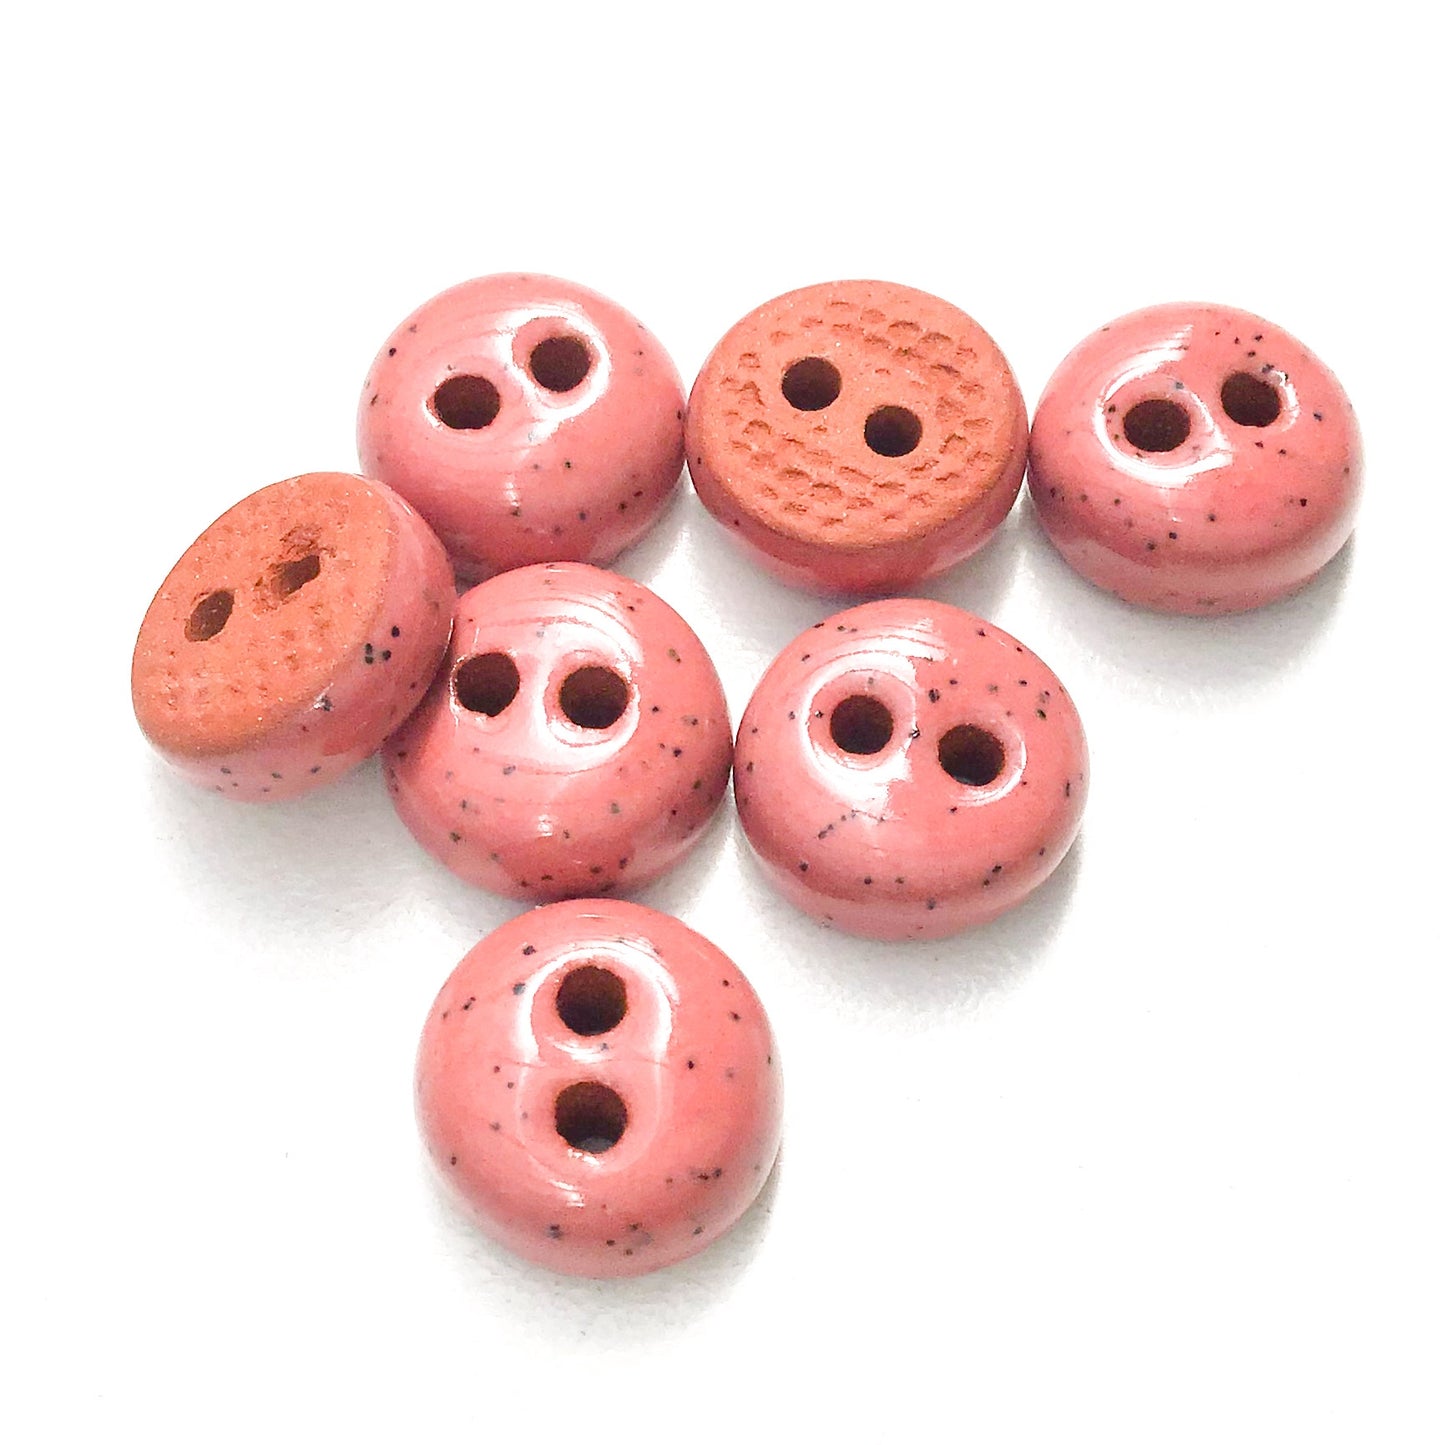 Speckled Earthy Rose Ceramic Buttons - Hand Made Clay Buttons - 7/16" - 7 Pack